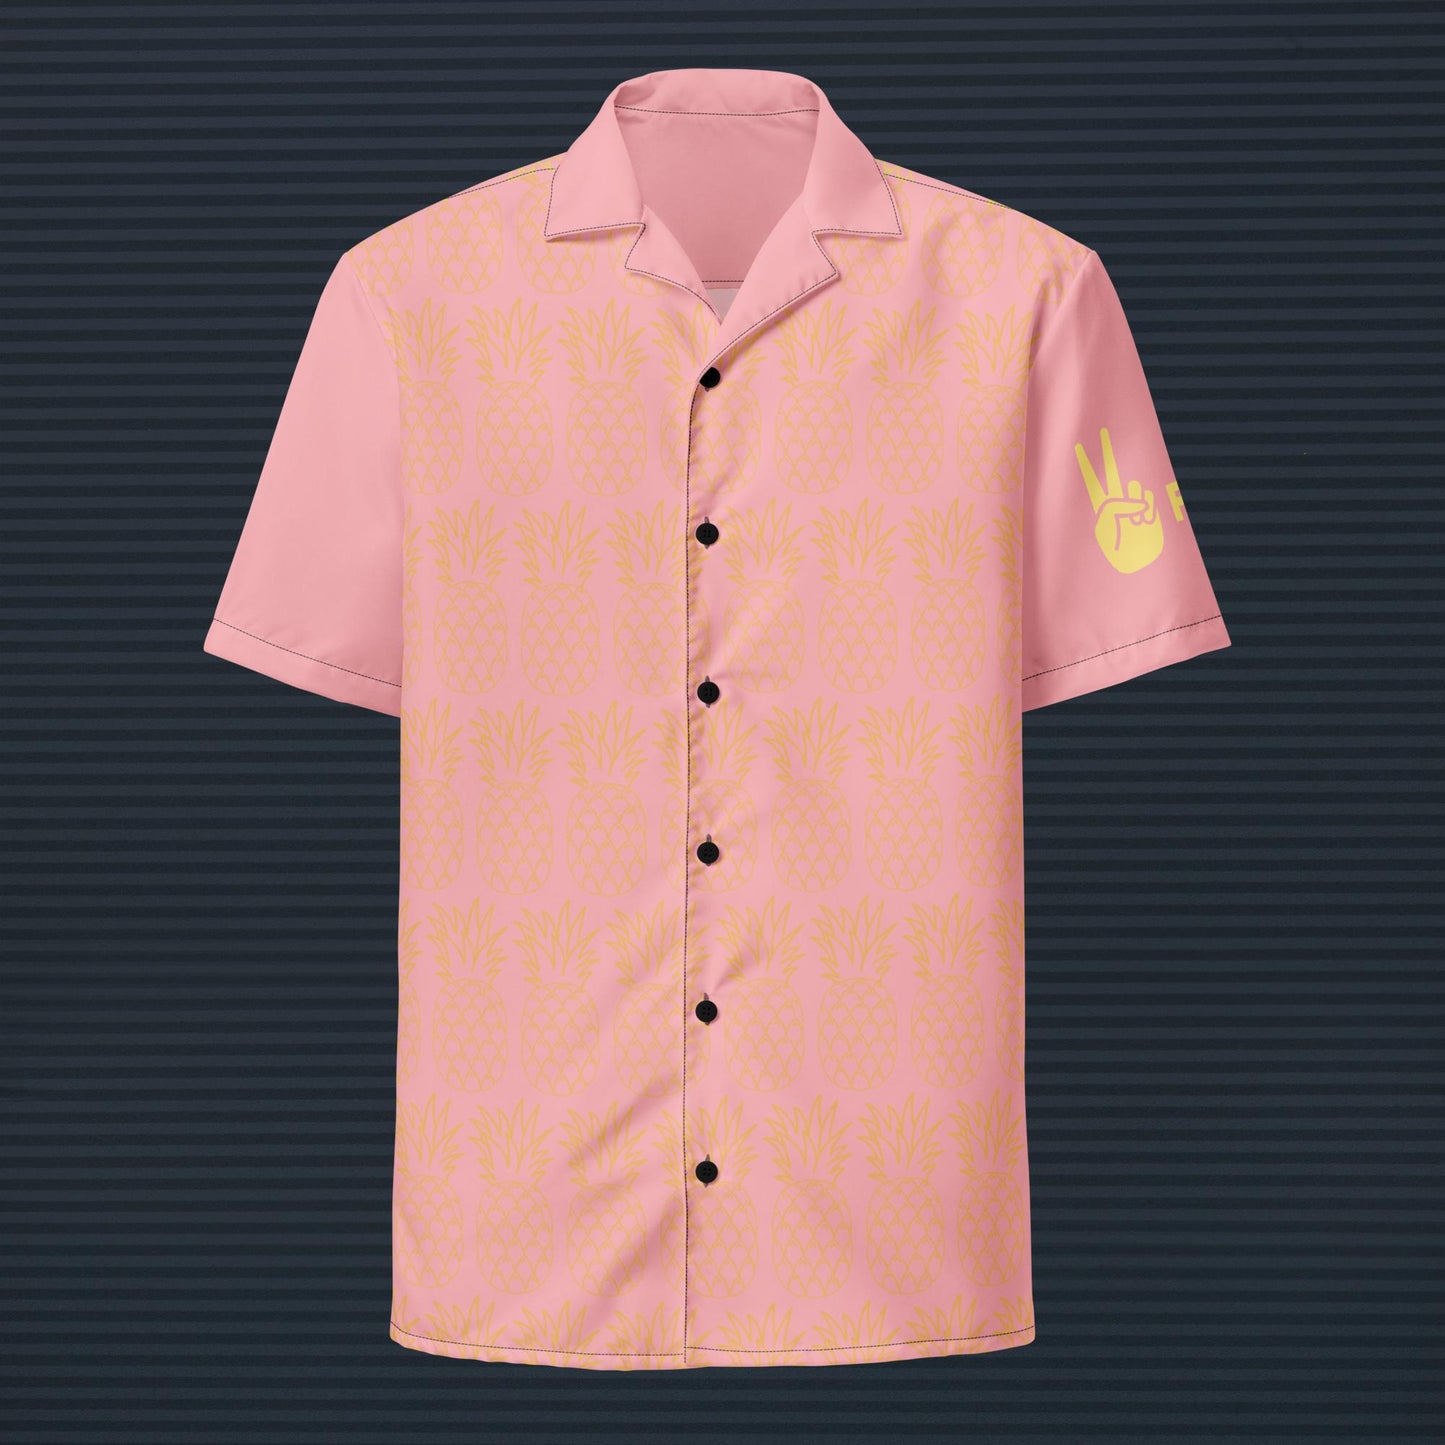 Peaceful Pink Pineapple button up shirt